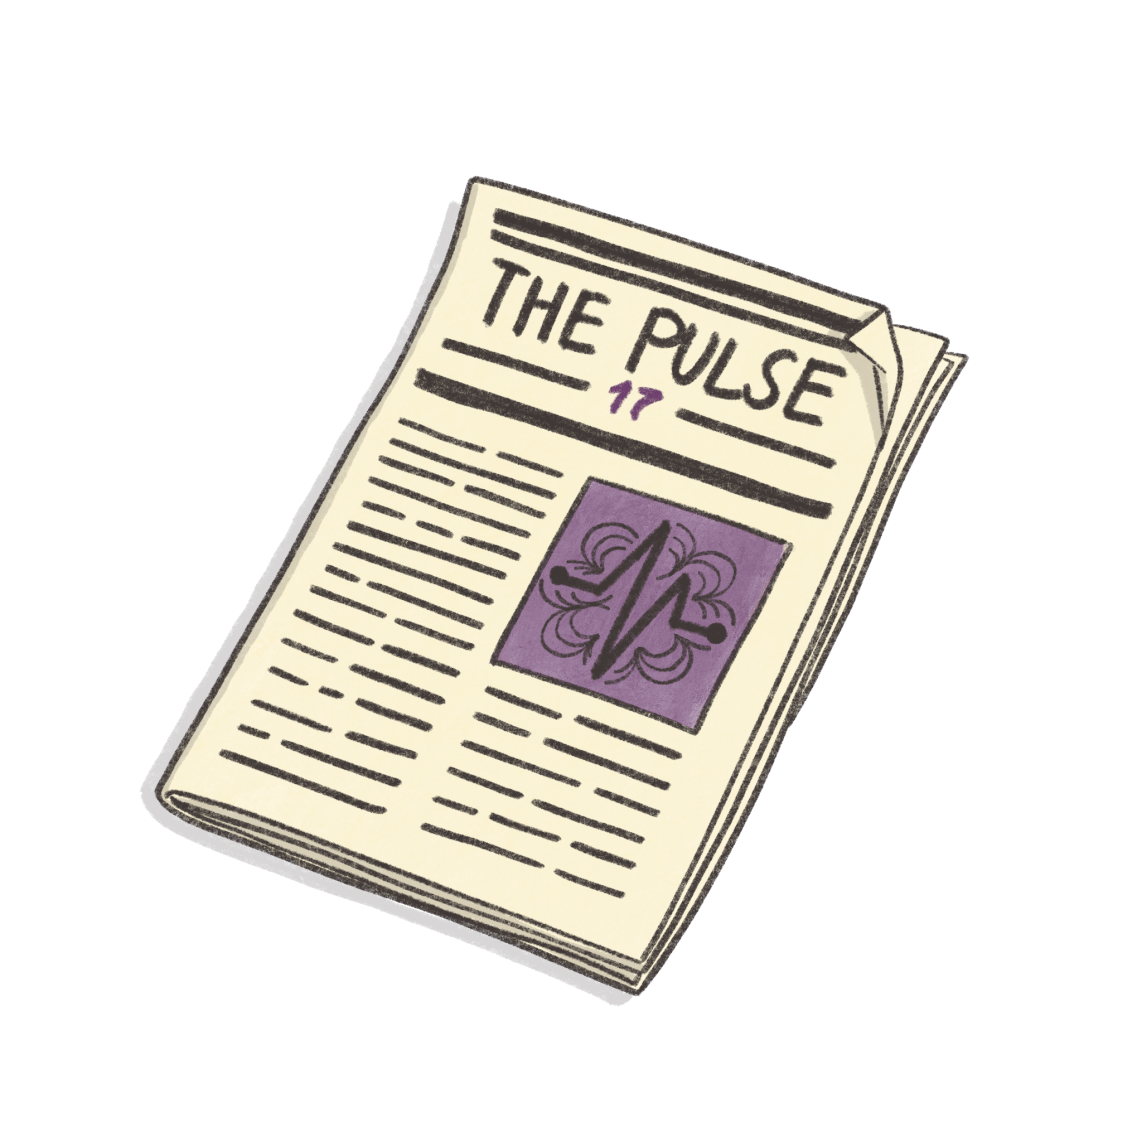 The Apoio Pulse – Issue 17 image